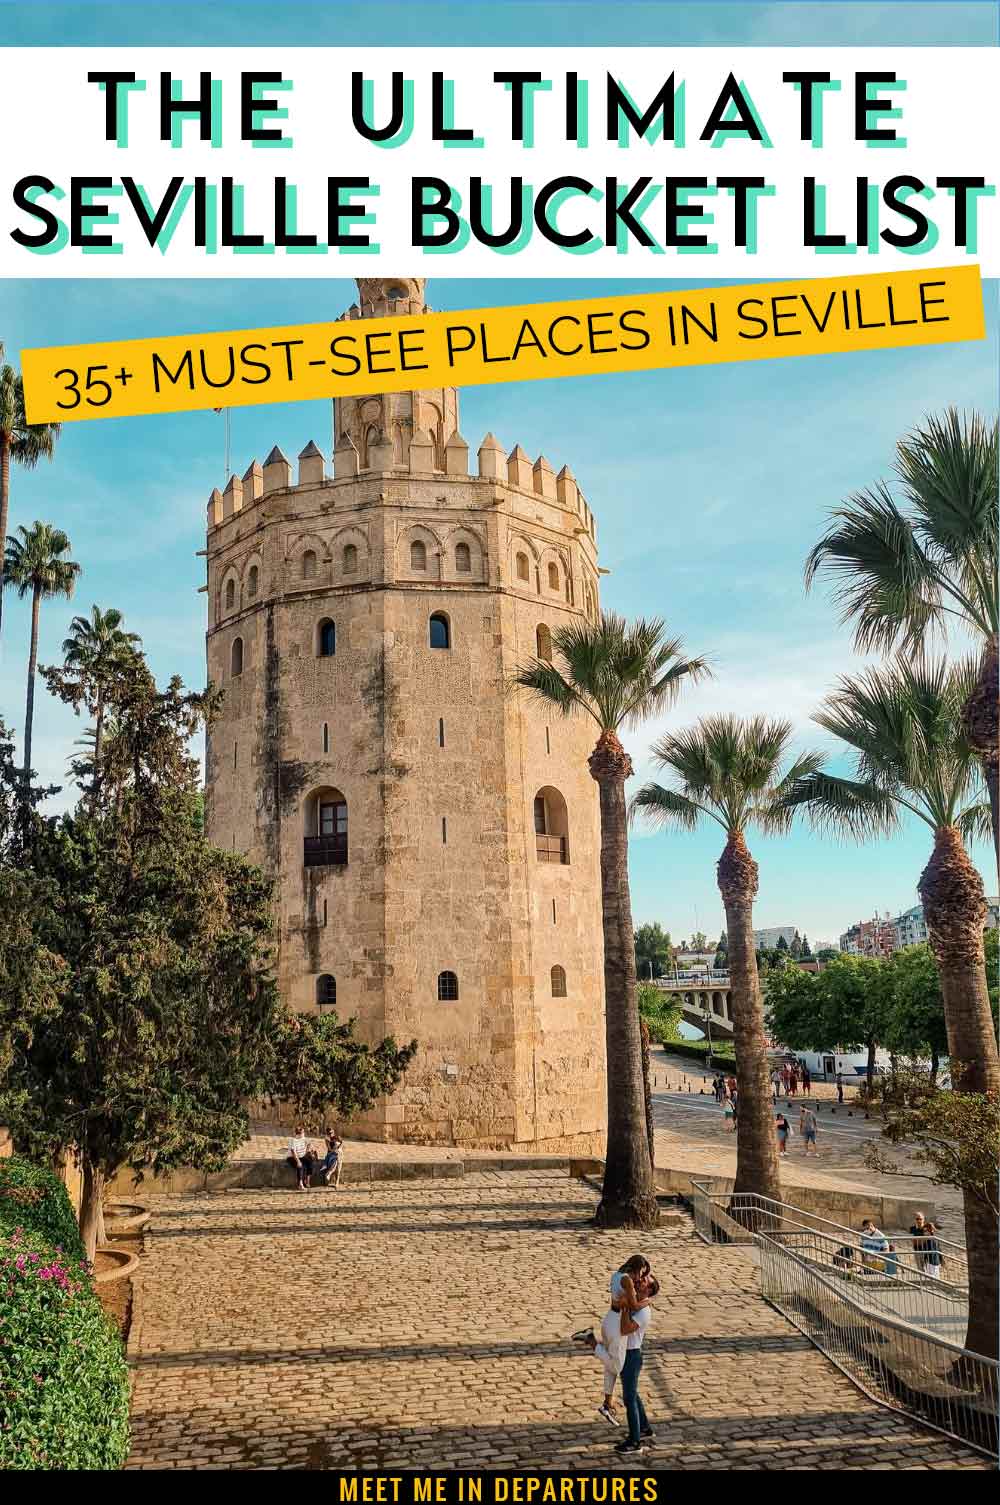 The Complete Seville Bucket List: 35+ Ideas for your Seville Itinerary 41